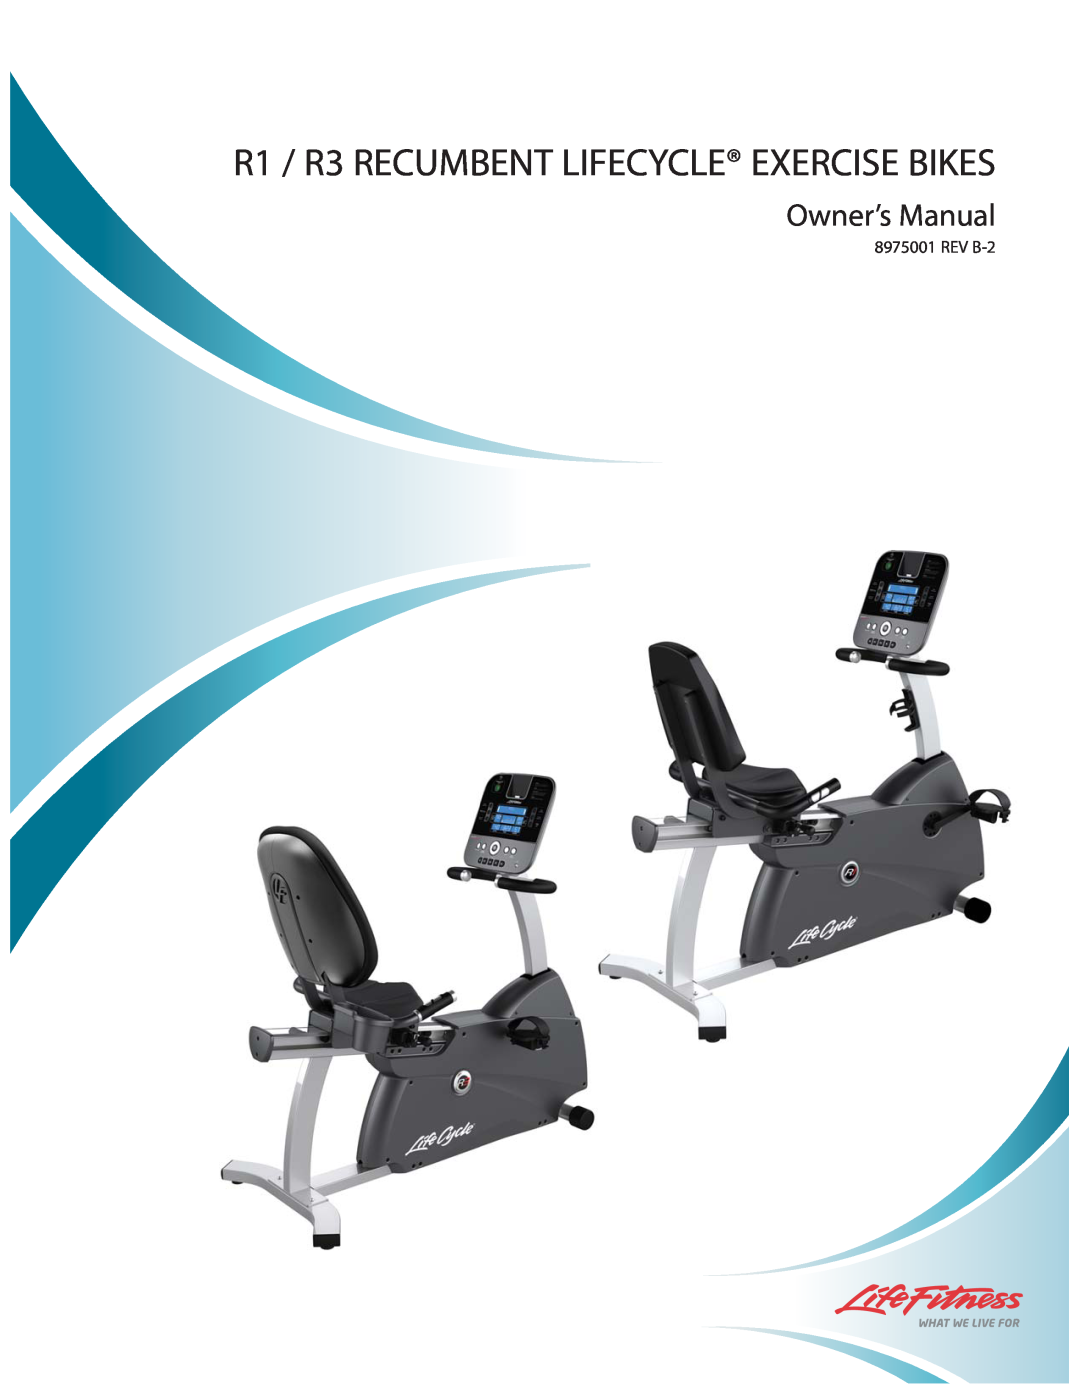 Life Fitness owner manual R1 / R3 RECUMBENT LIFECYCLE EXERCISE BIKES, Owner’s Manual 